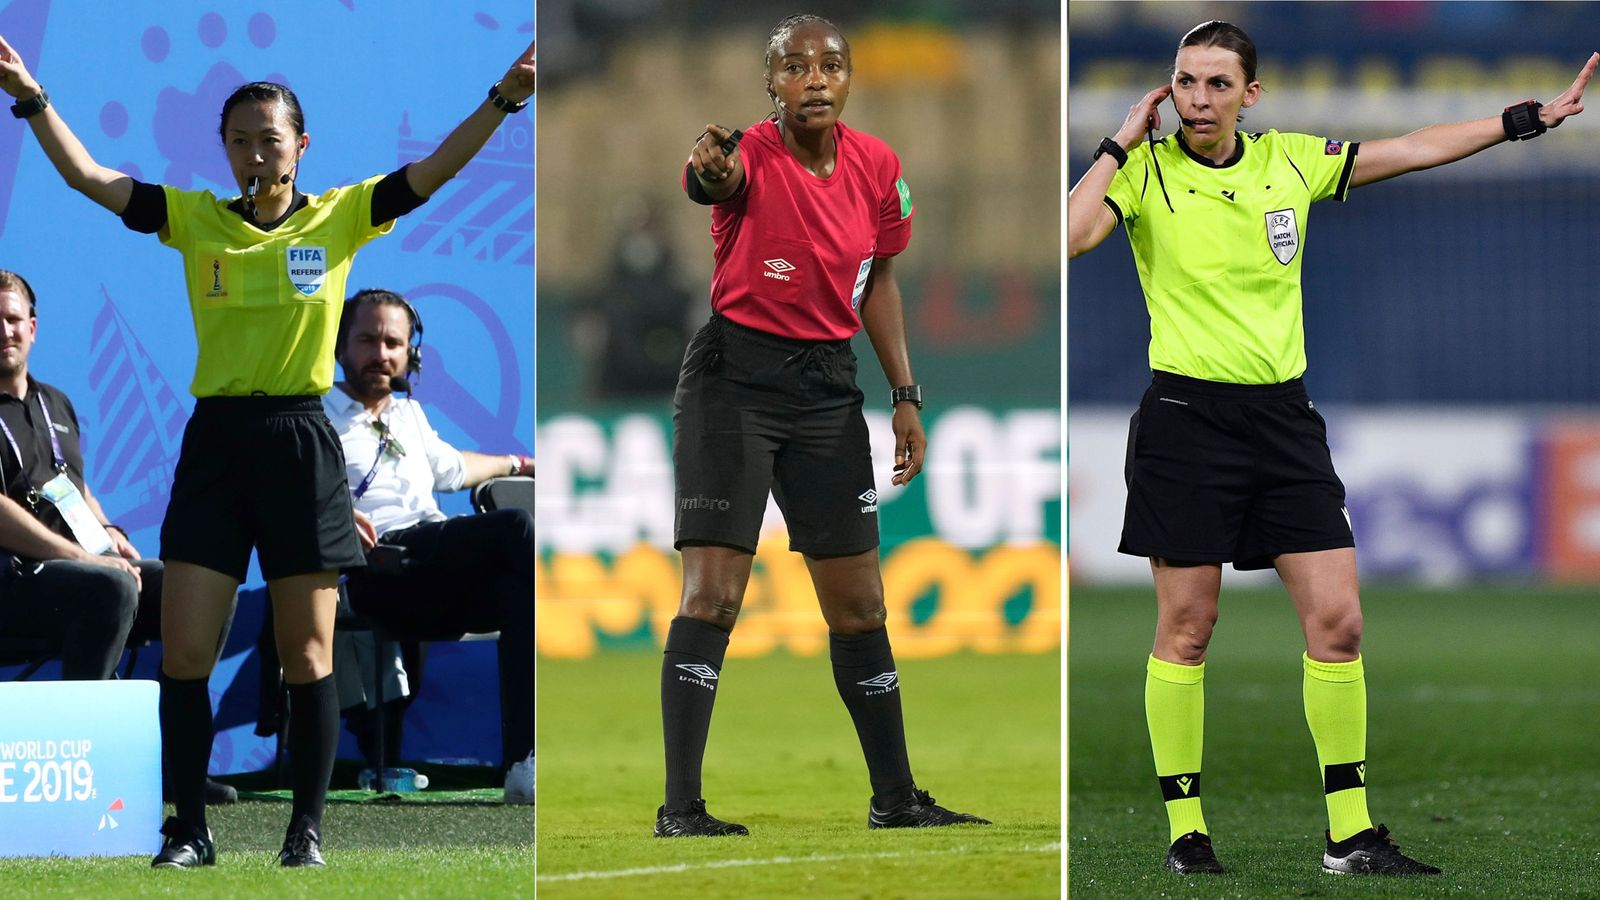 FEMALE REFEREES TO OFFICIATE MEN’S WORLD CUP FOR THE FIRST TIME ...